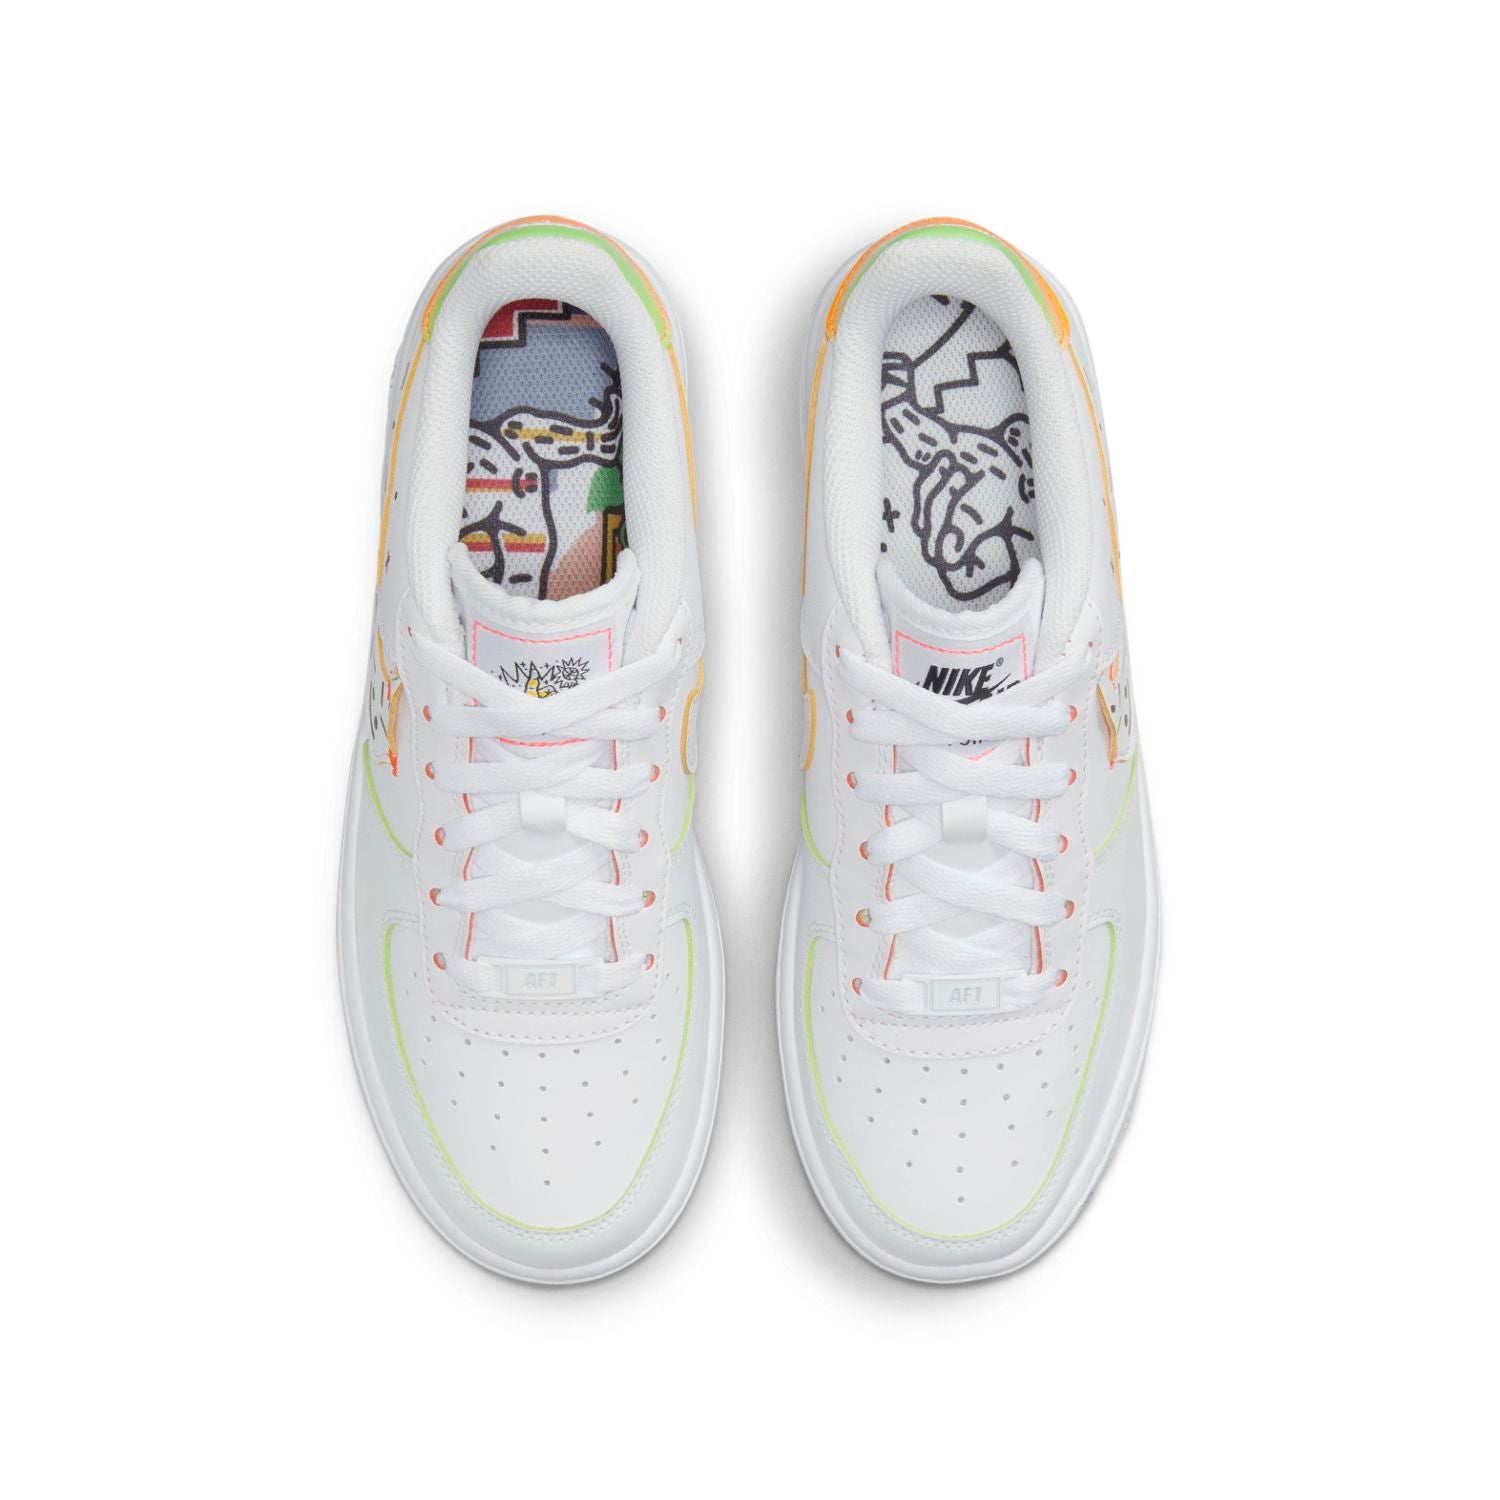 Nike Air Force 1 LV8 (GS) in White - Size 5